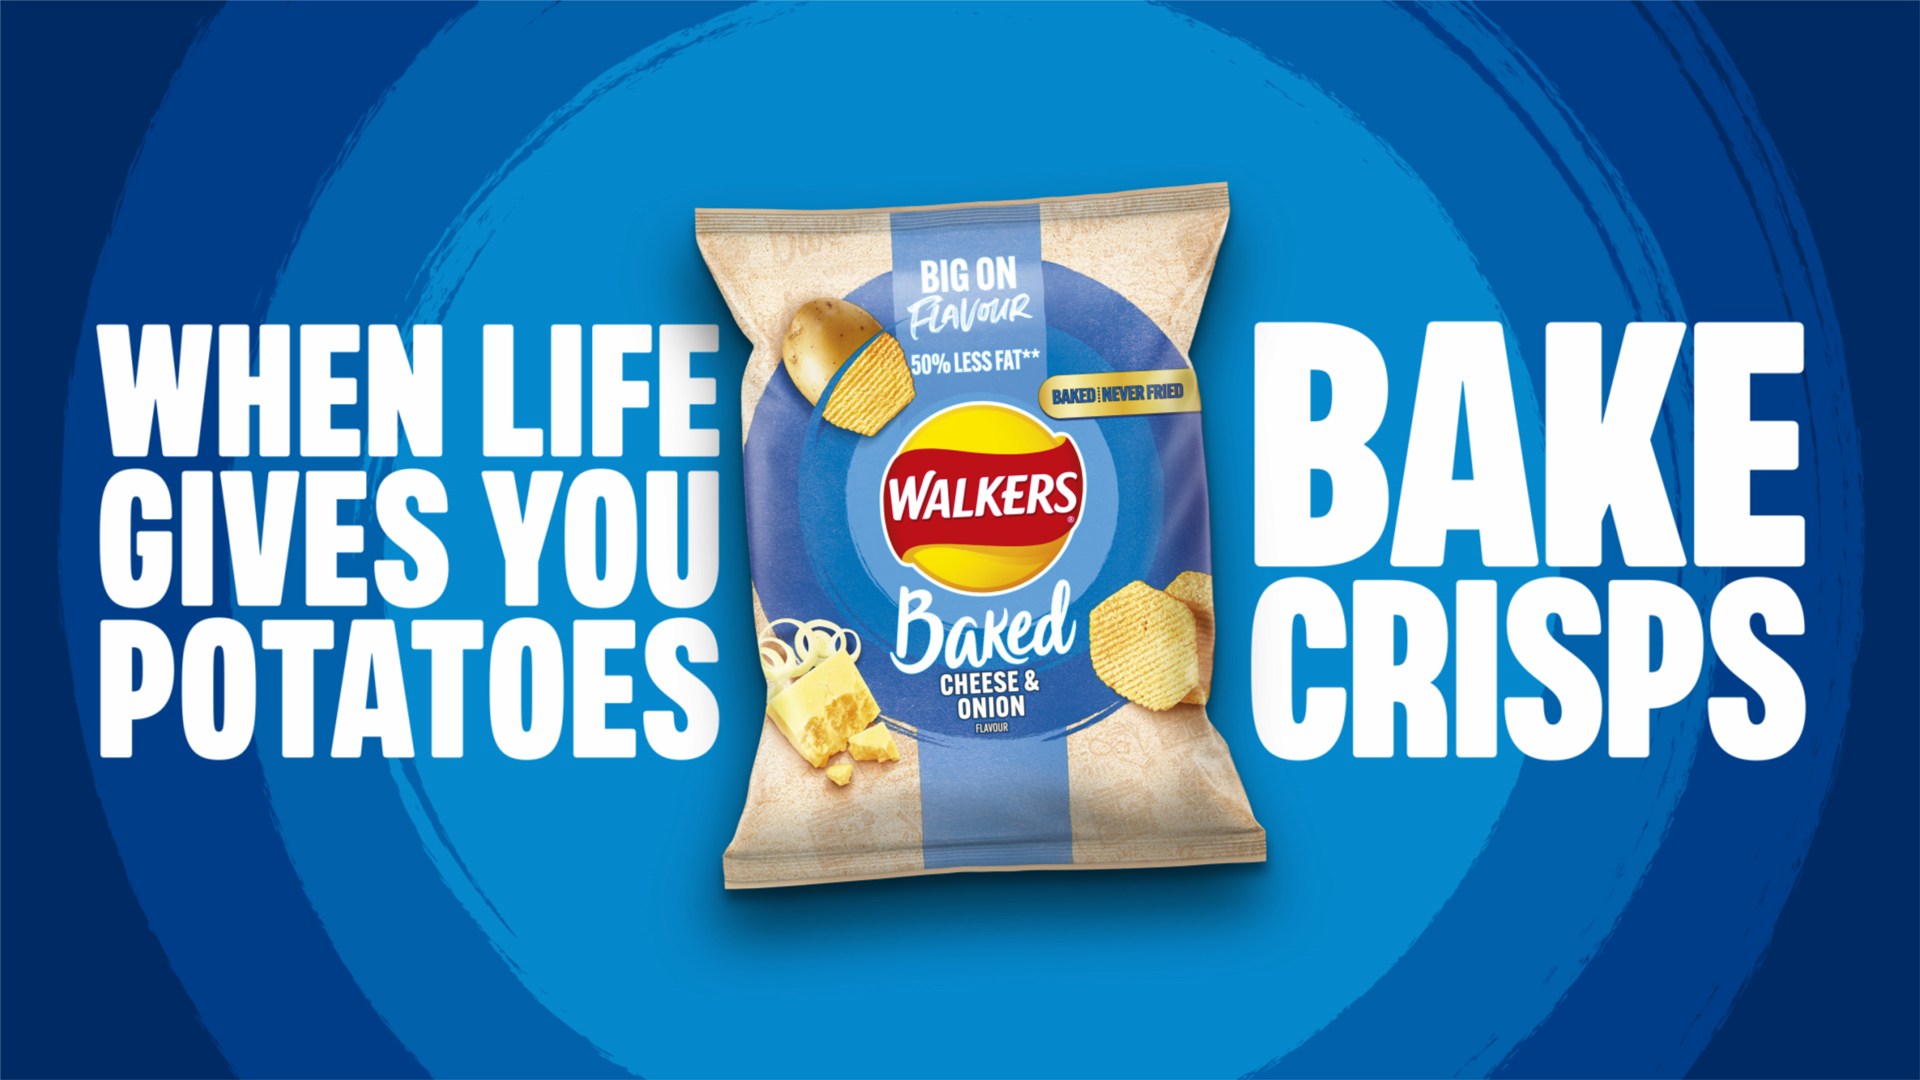 Walkers launches new campaign for Baked crisps range